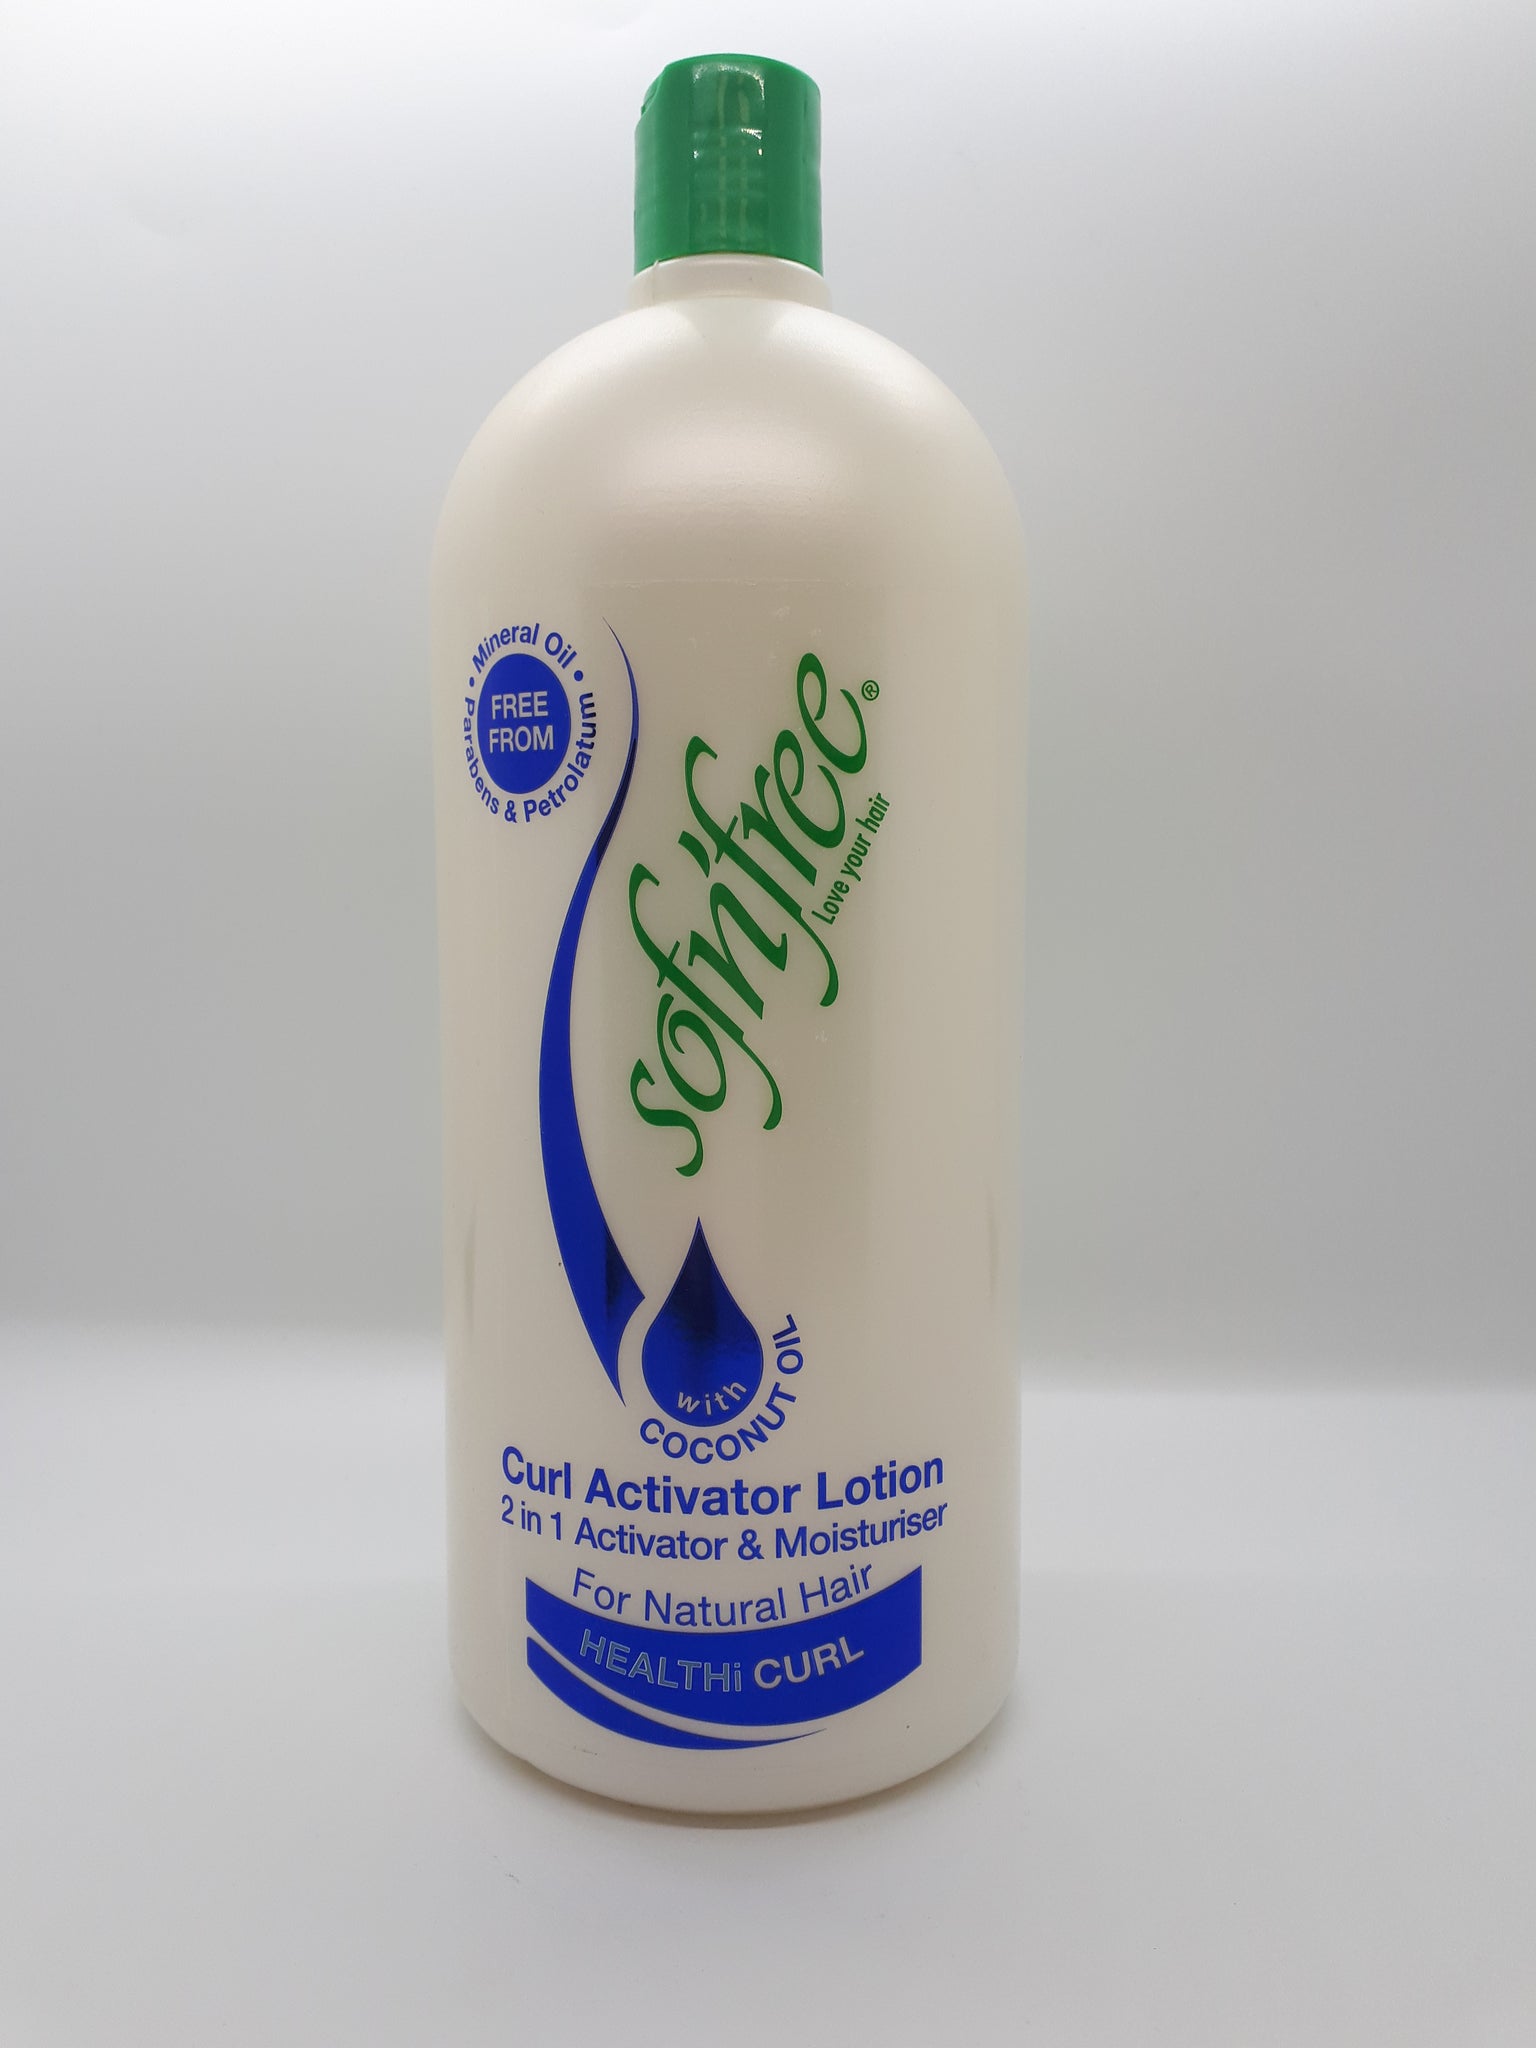 SOFN'FREE 2 IN 1 CURL ACTIVATOR LOTION 32oz